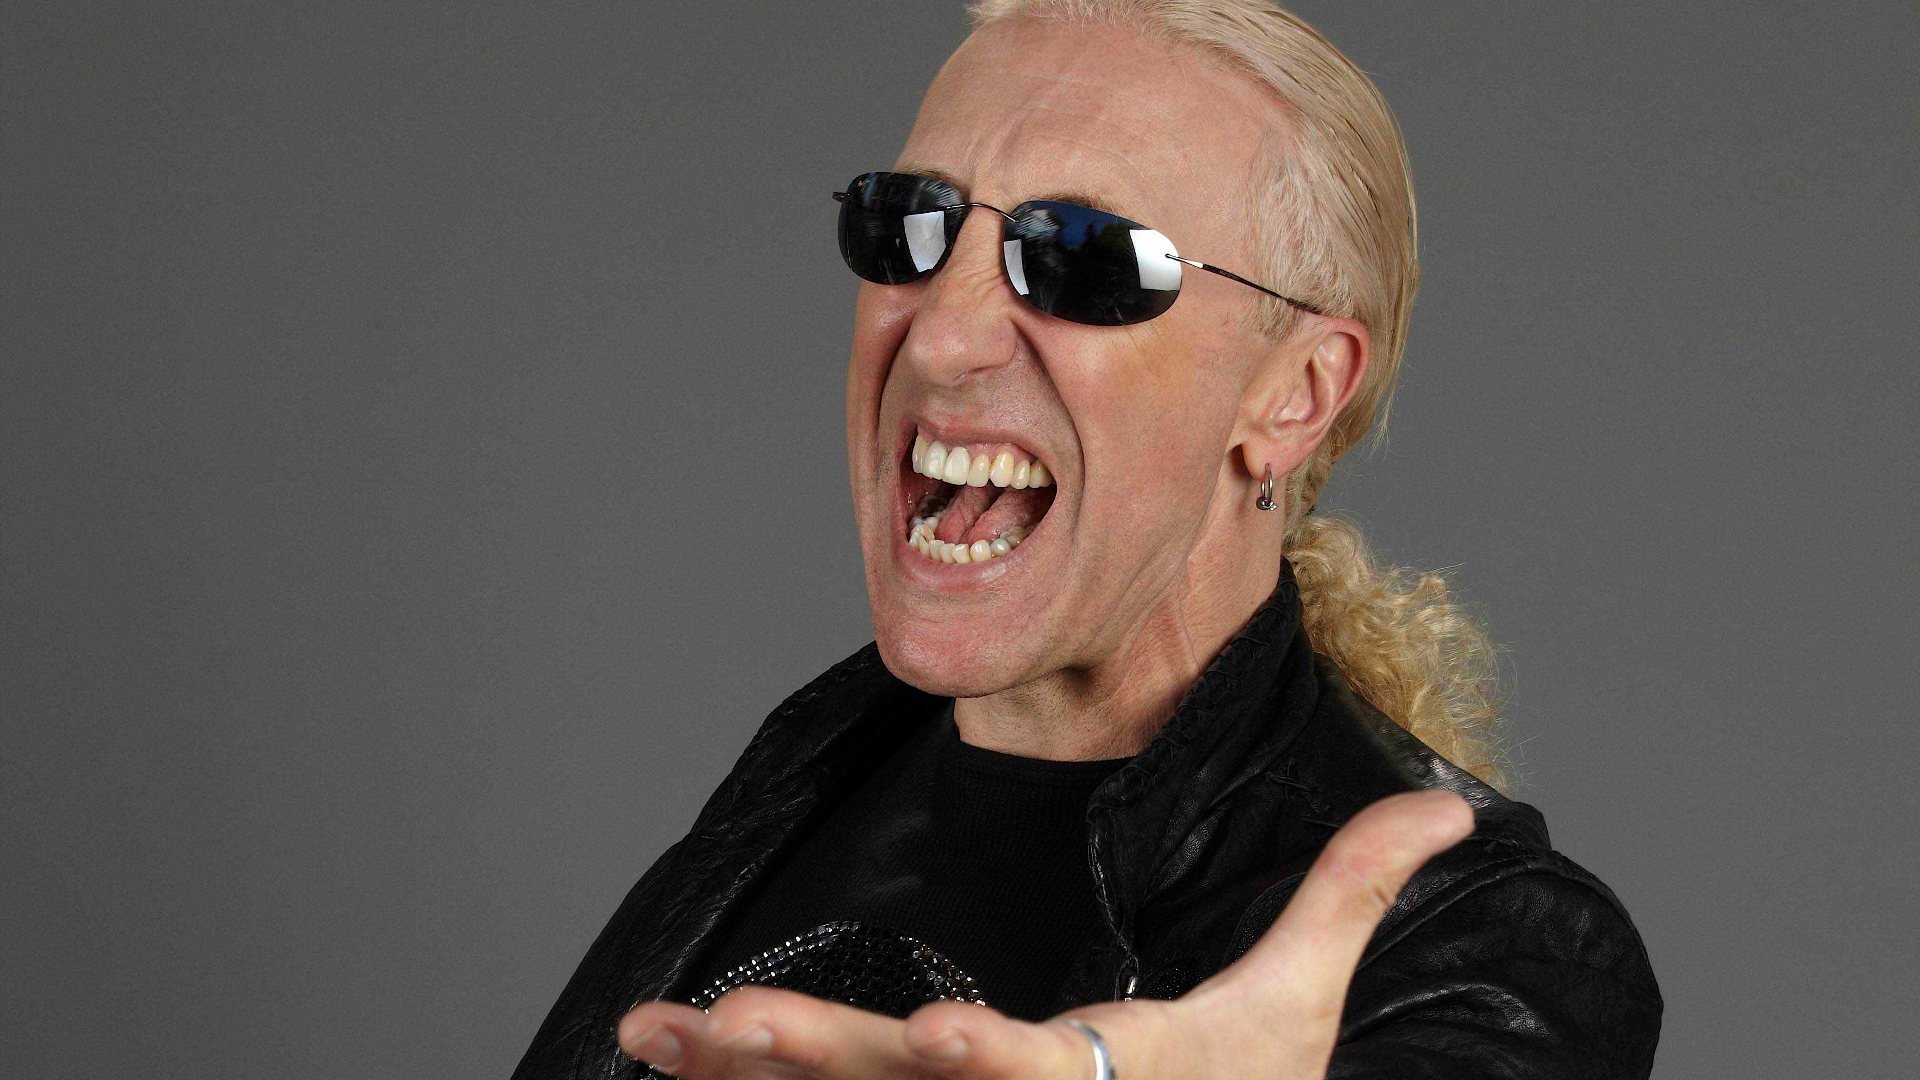 Twisted Sister Wallpapers